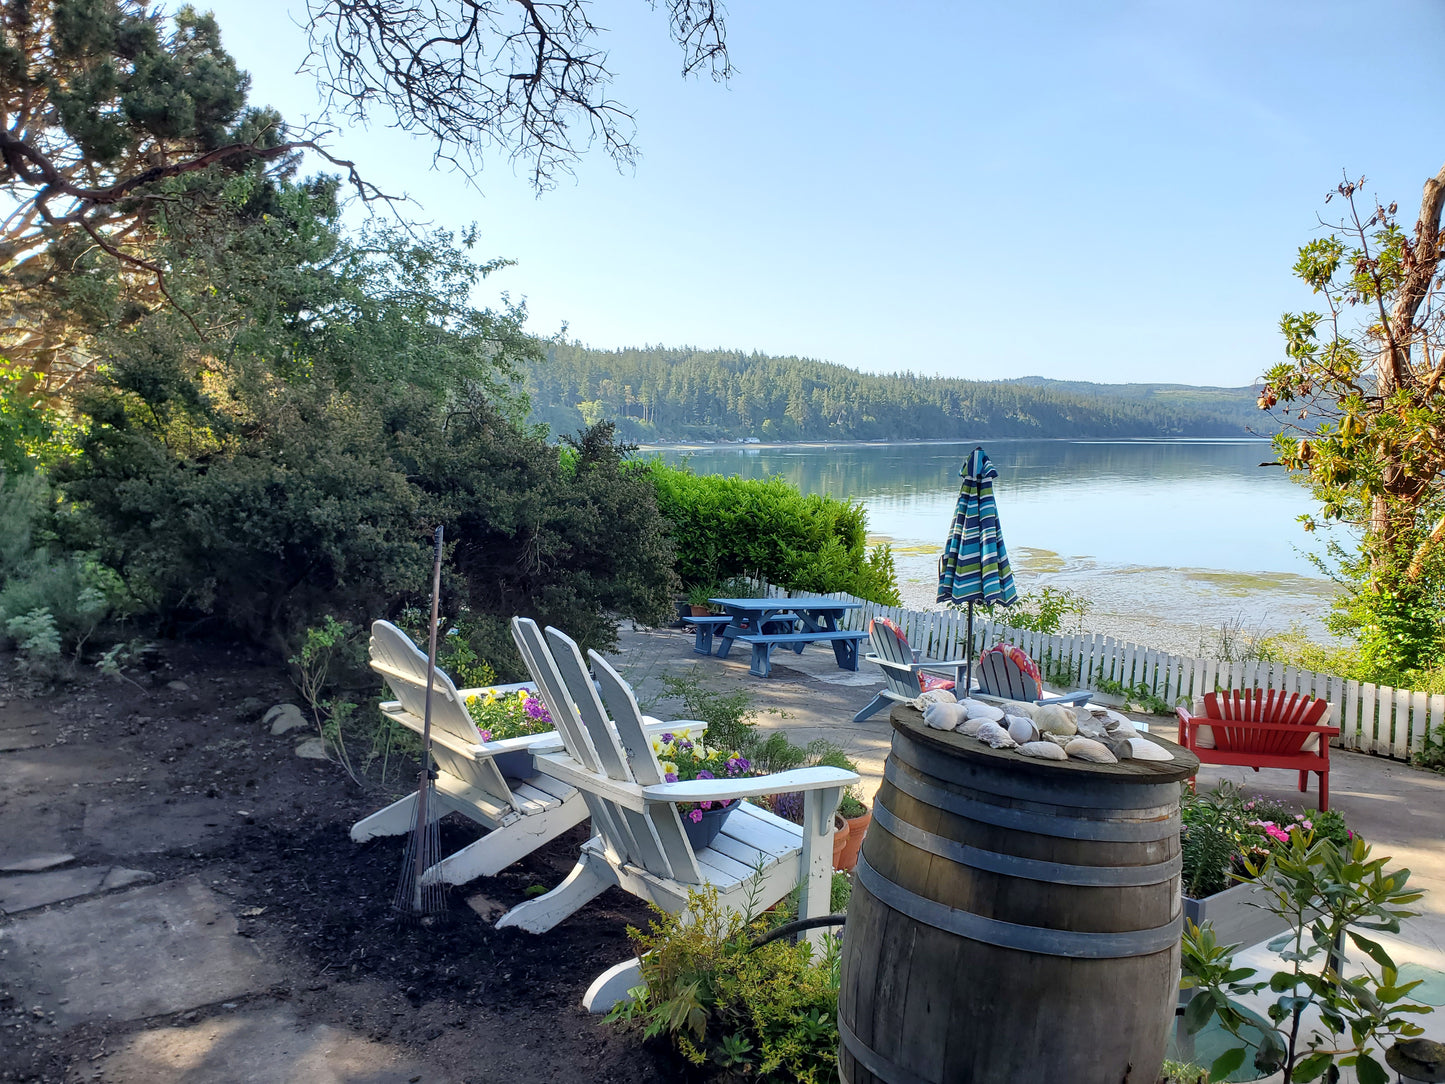 Jenny’s Cottage Vacation Rental near Port Townsend WA perfect for couples or a wedding retreat